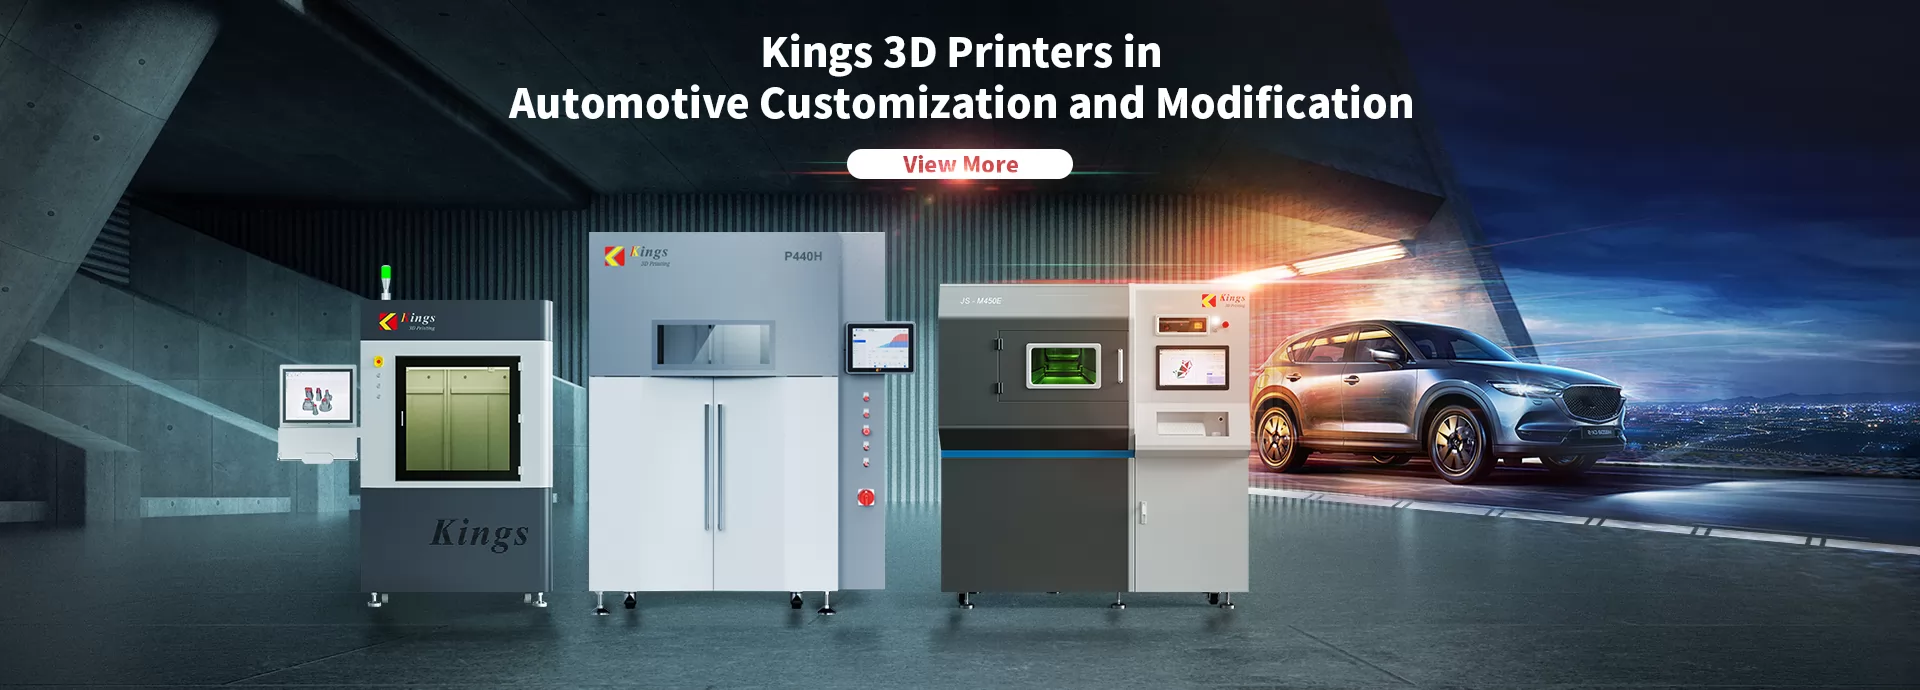 Kings 3D Printers in Automotive Customization and Modification